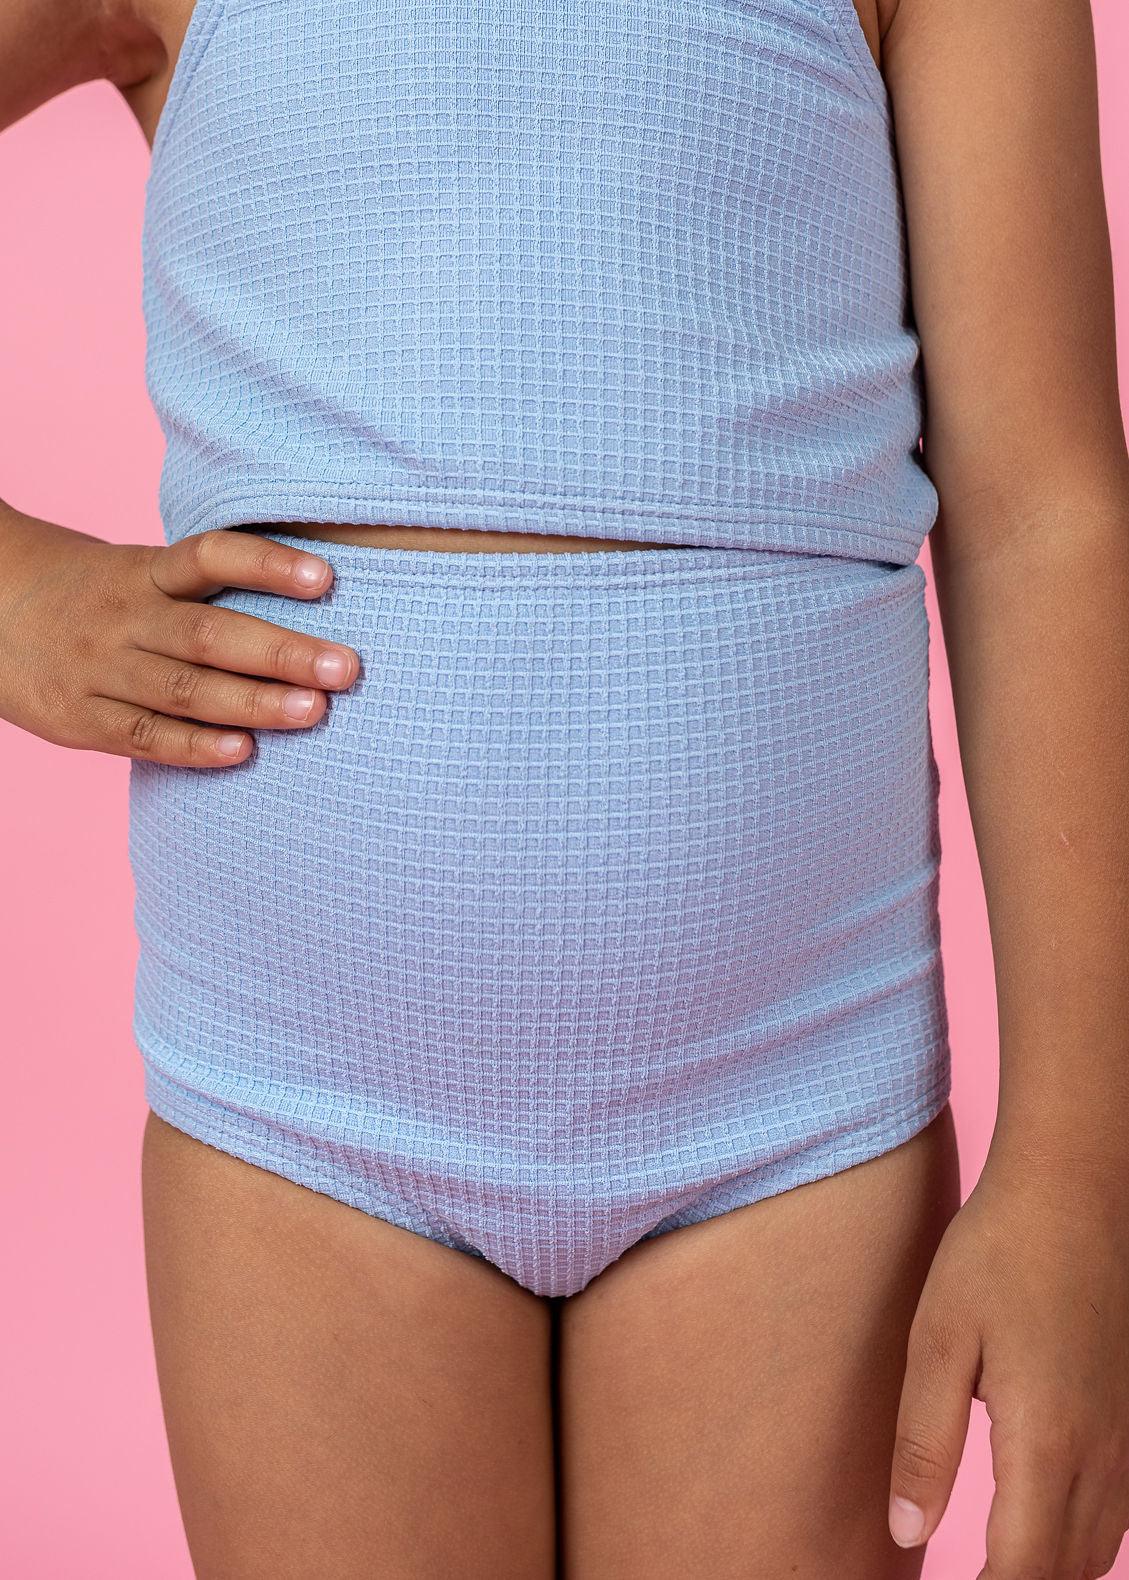 Girls High-Waisted Swimsuit Bottoms - Waffled Barely Blue